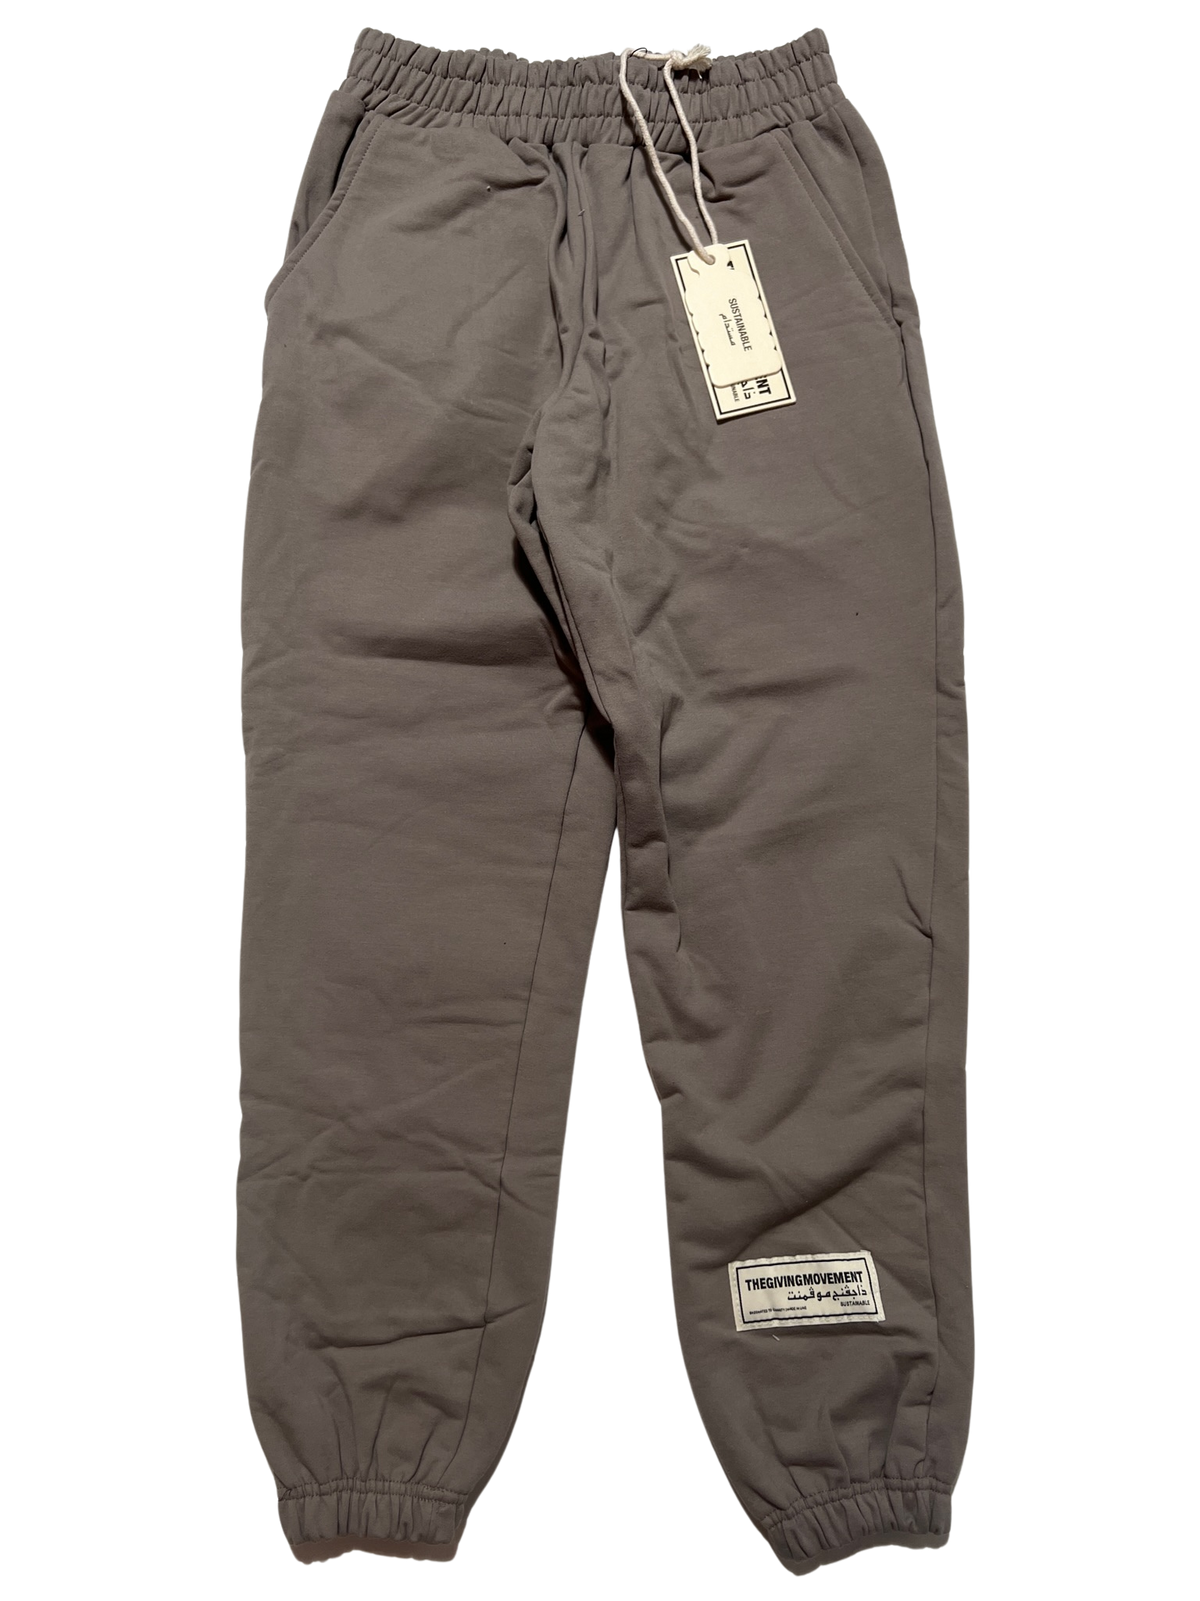 The Giving Movement- Tan Sweatpants NEW WITH TAGS!